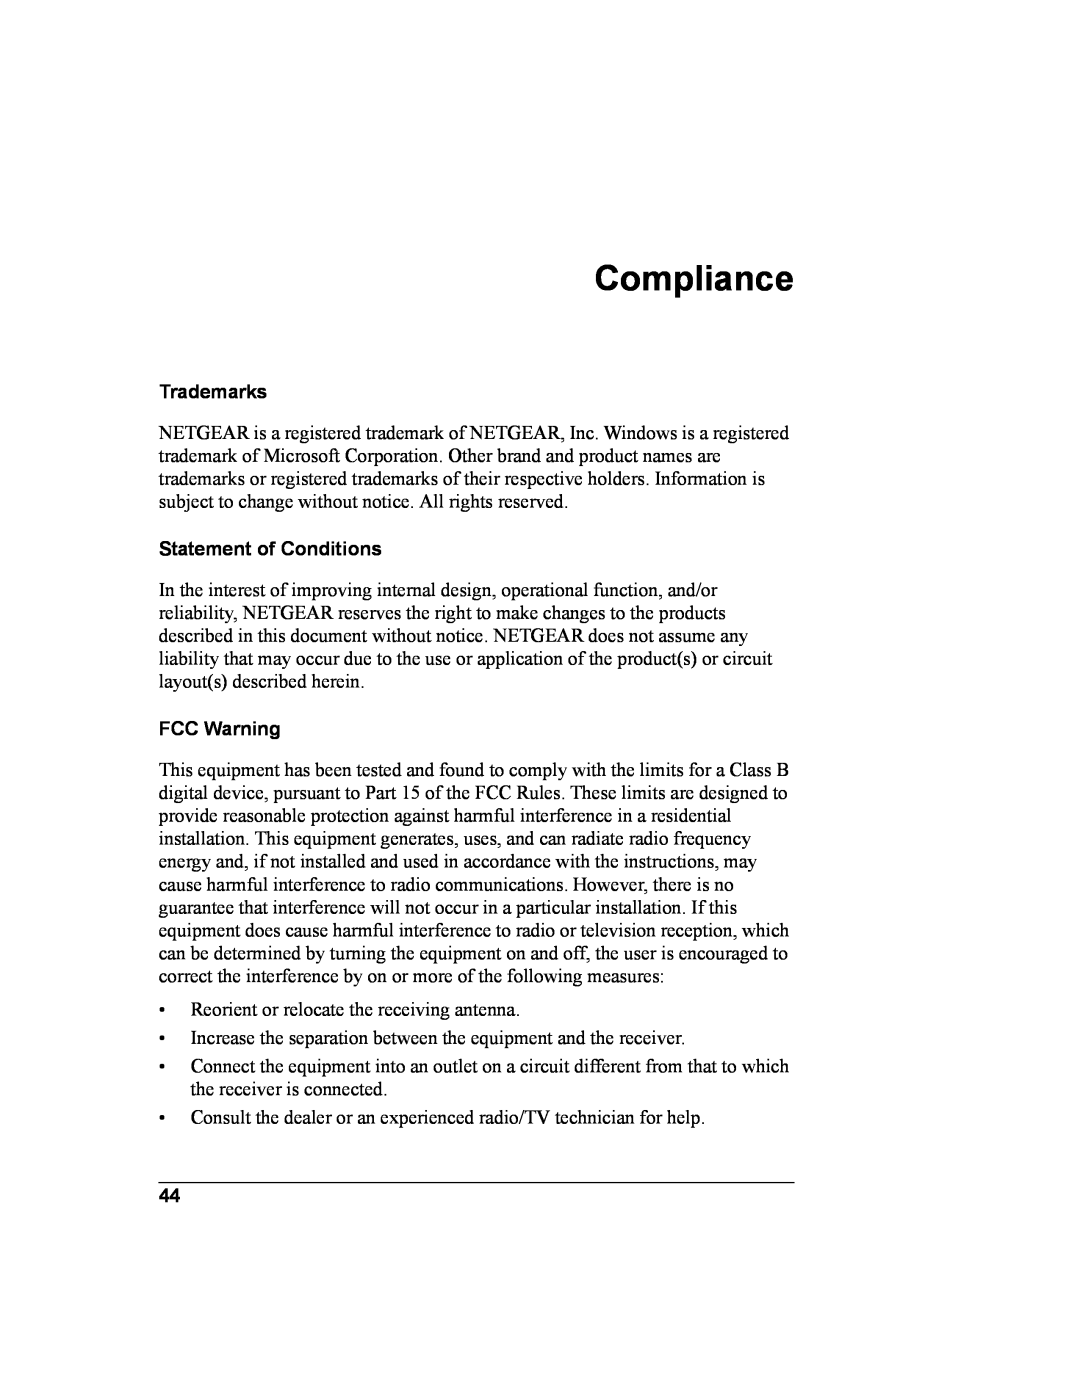 NETGEAR WAB102 manual Trademarks, Statement of Conditions, FCC Warning, Compliance 